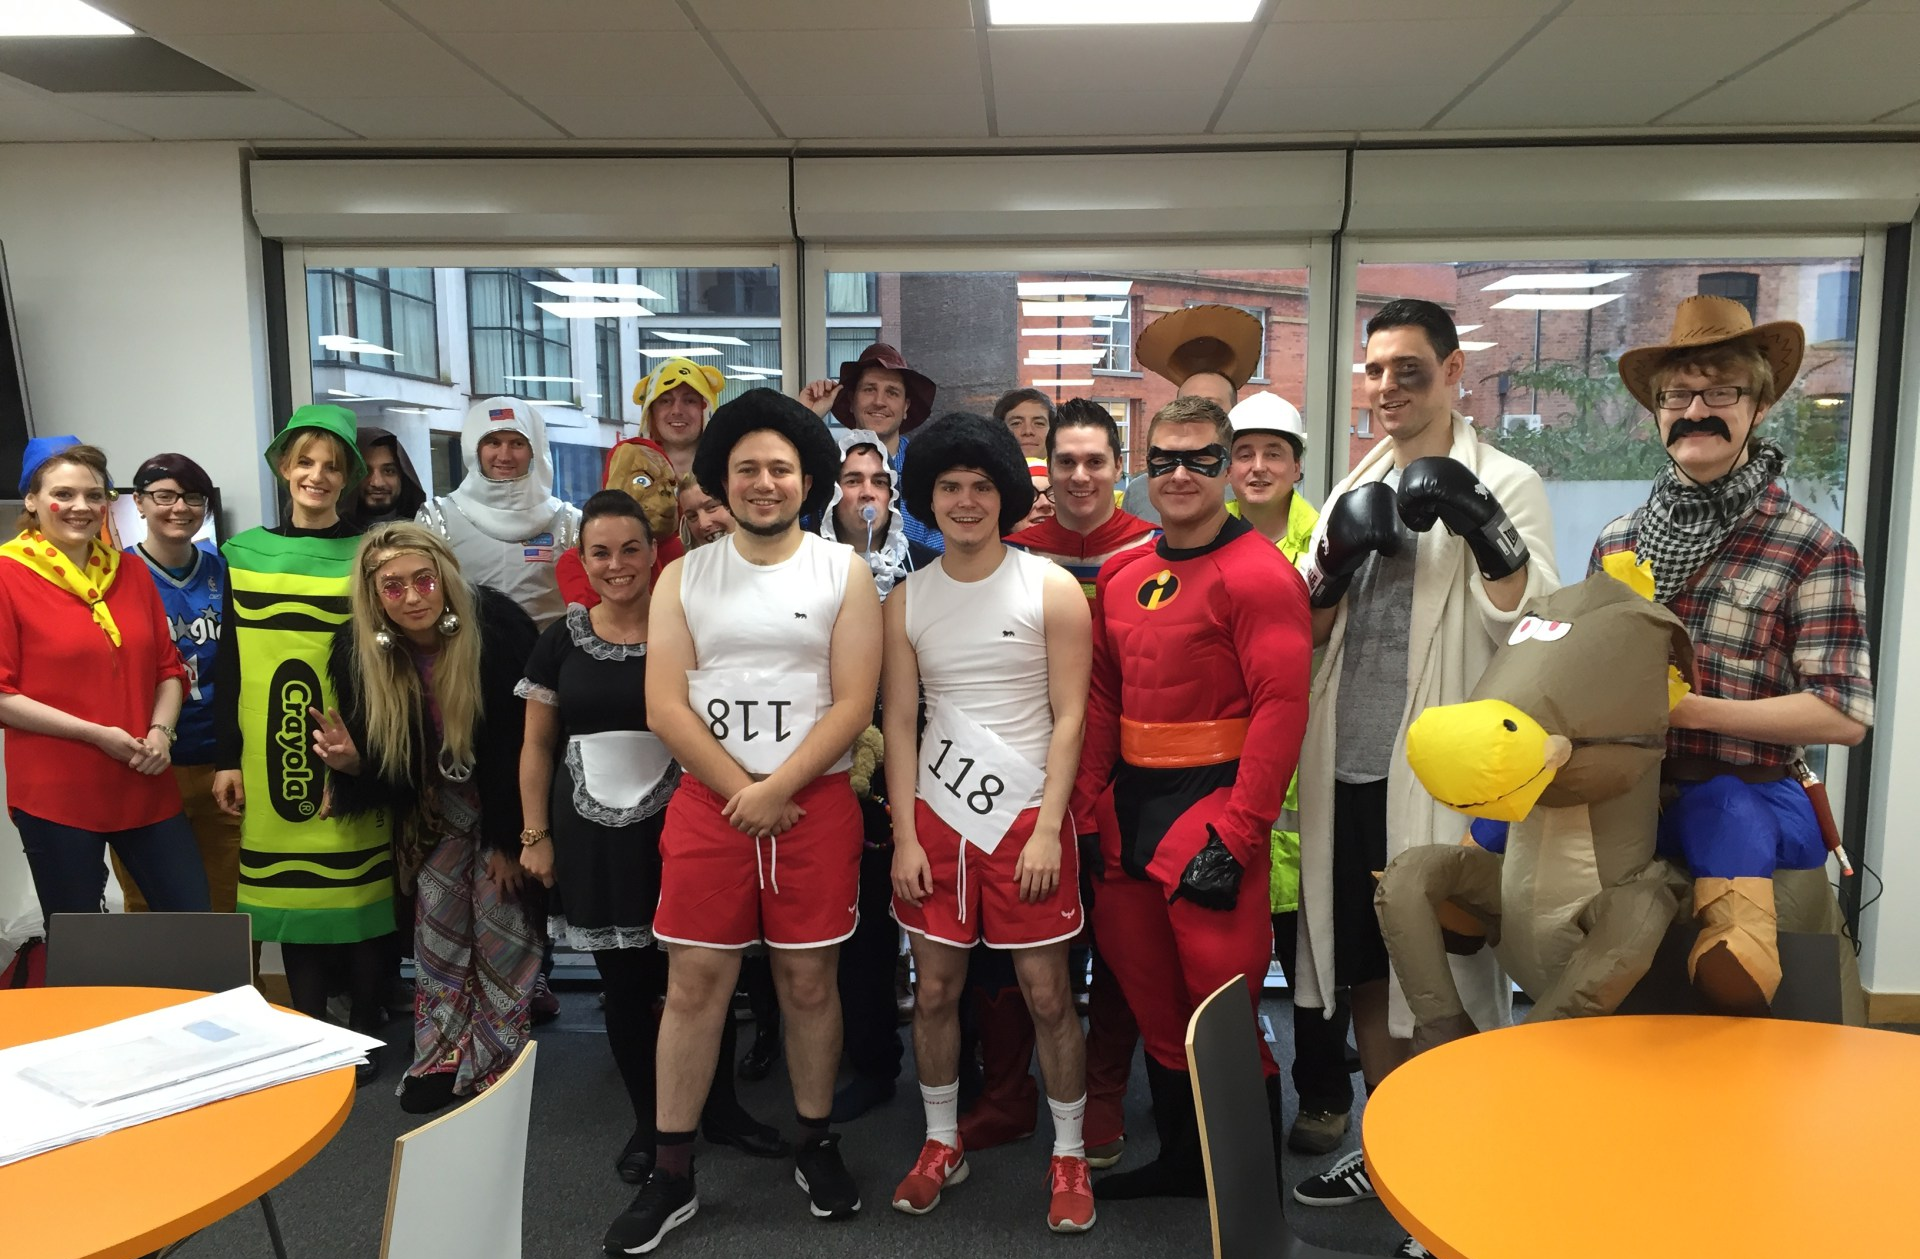 Children in Need capers at Cast towers